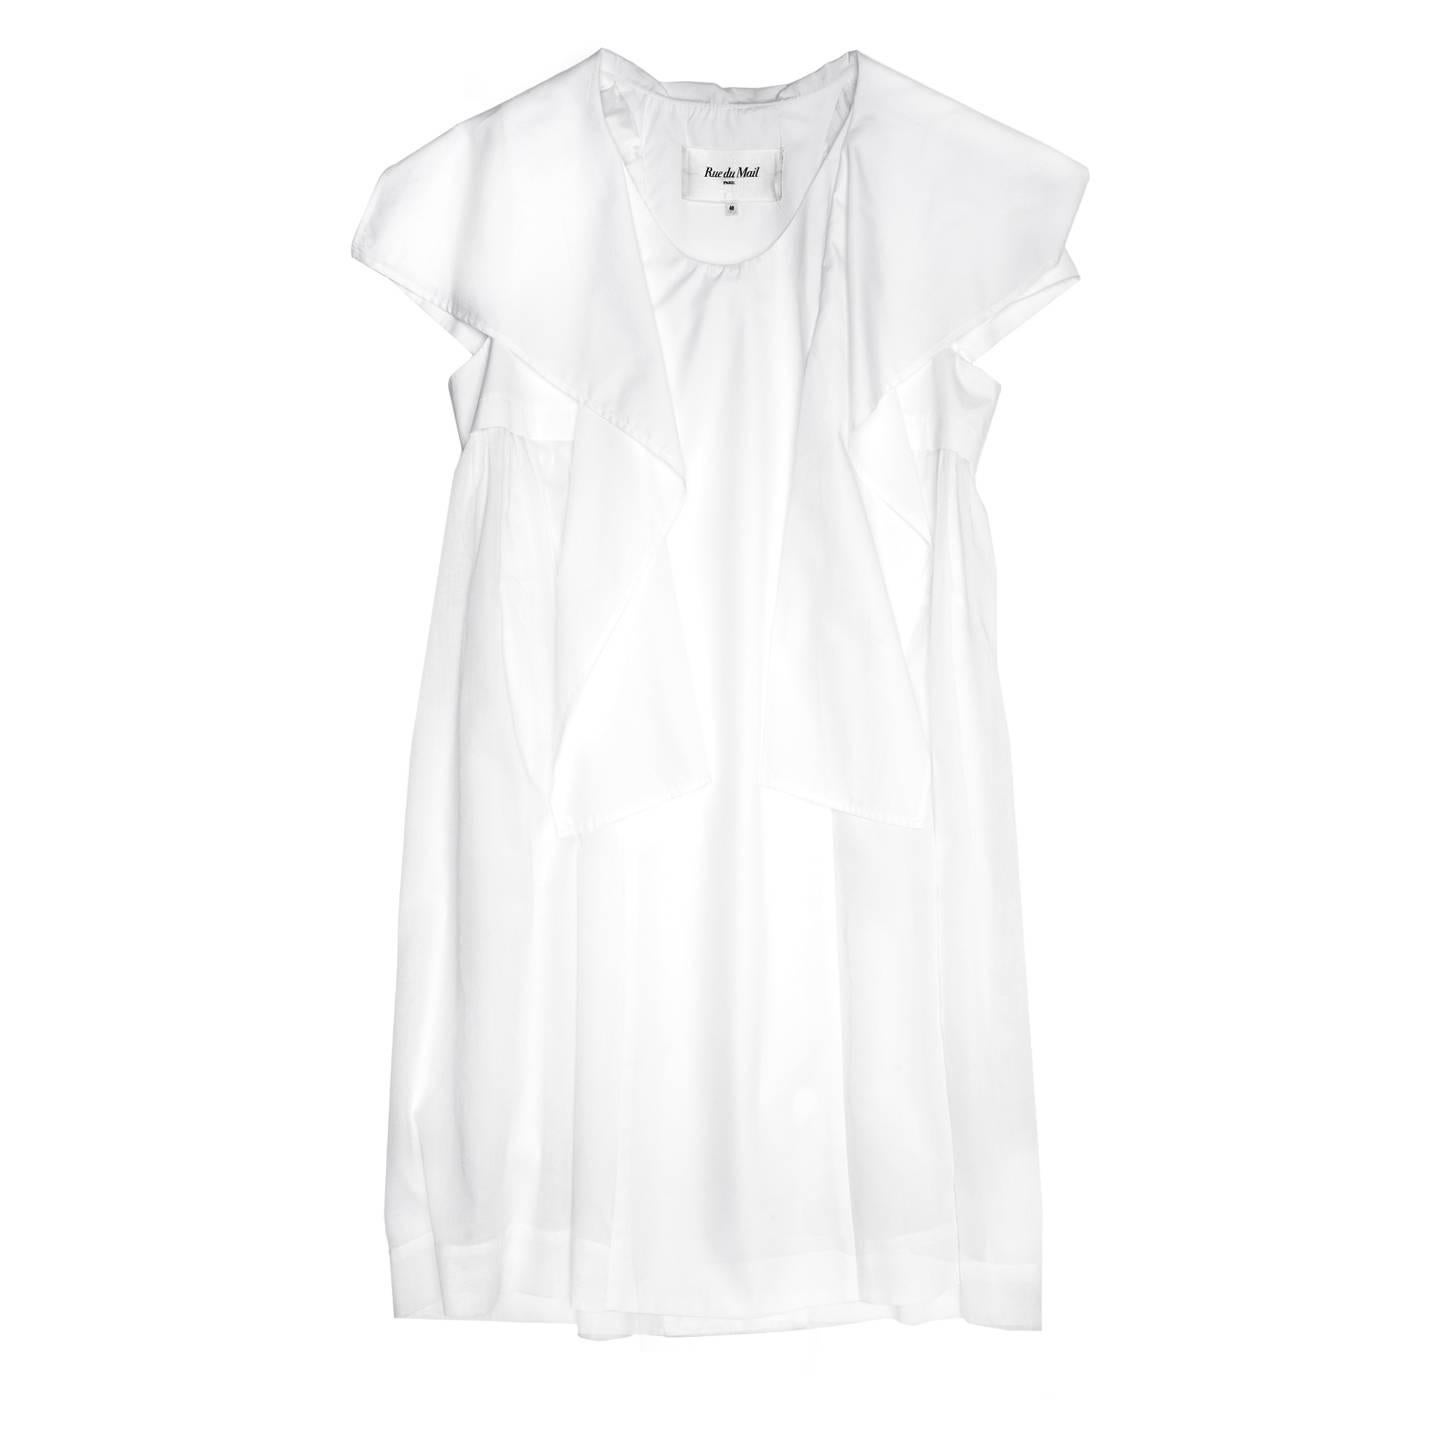 White cotton dress with scooped collar, short sleeves and waterfall drape detail at front neck and bust. The dress length is below knee, fully lined, it has an A-line volume thanks to the thin cotton inserts on the sides that gather at under bust,